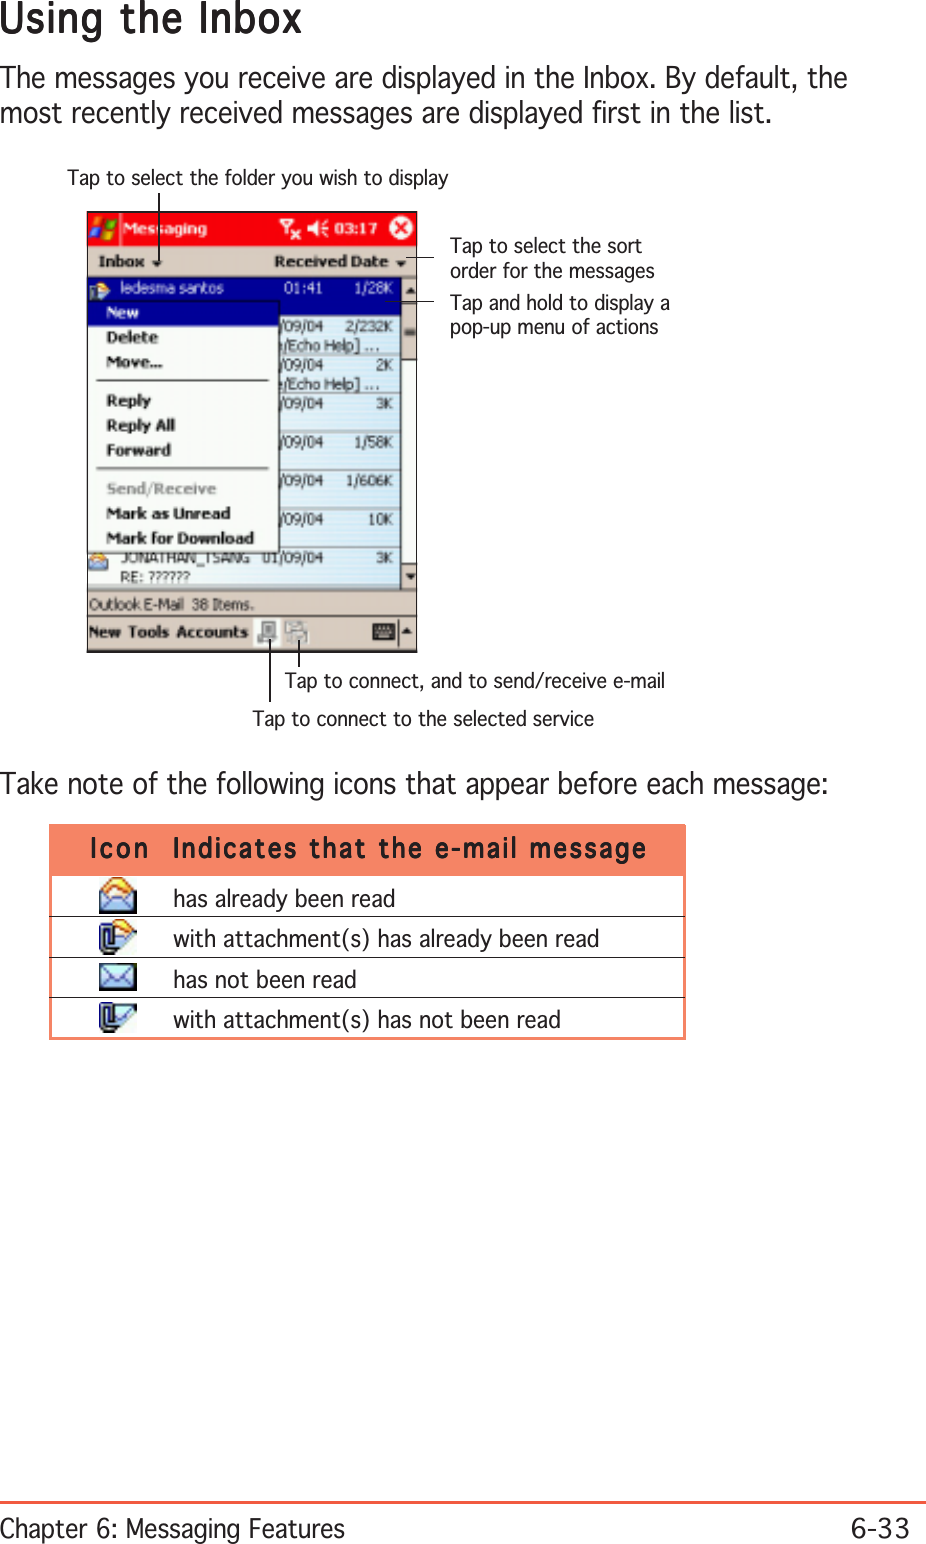 Chapter 6: Messaging Features6-33Tap to select the sortorder for the messagesTap and hold to display apop-up menu of actionsTap to connect, and to send/receive e-mailTap to connect to the selected serviceTap to select the folder you wish to displayUsing the InboxUsing the InboxUsing the InboxUsing the InboxUsing the InboxThe messages you receive are displayed in the Inbox. By default, themost recently received messages are displayed first in the list.Take note of the following icons that appear before each message:IconIconIconIconIcon Indicates that the e-mail messageIndicates that the e-mail messageIndicates that the e-mail messageIndicates that the e-mail messageIndicates that the e-mail messagehas already been readwith attachment(s) has already been readhas not been readwith attachment(s) has not been read